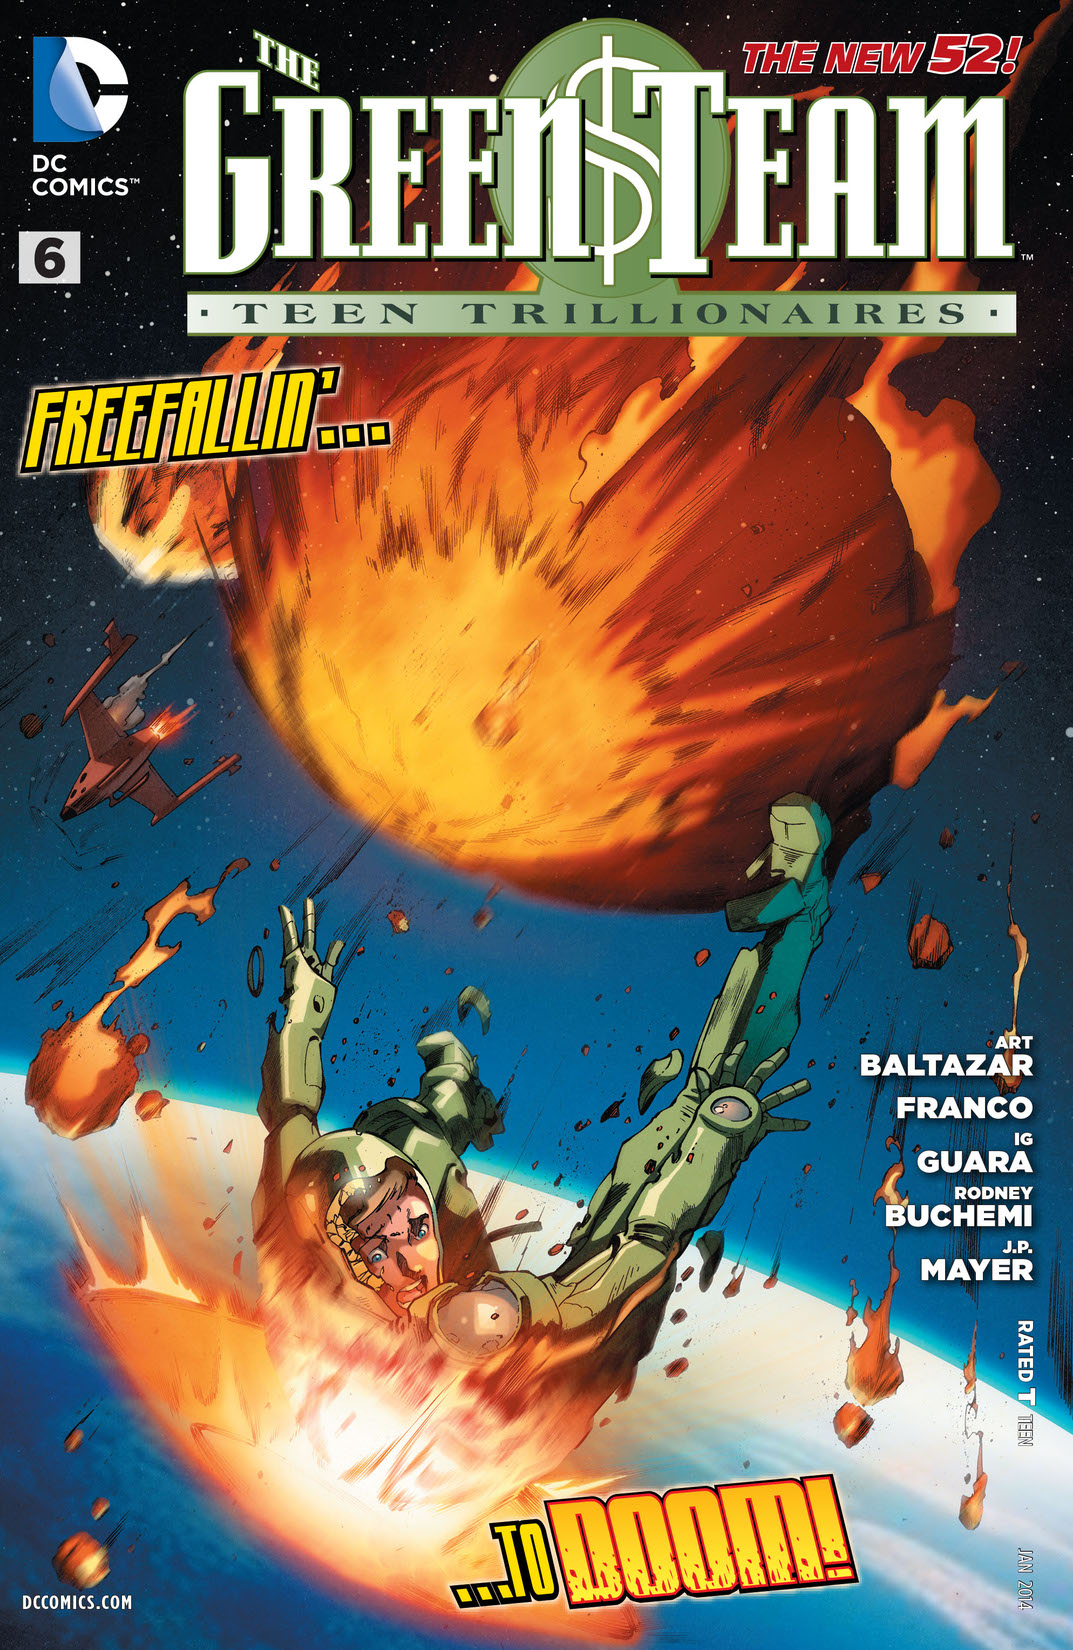 The Green Team: Teen Trillionaires (2013-) #6 preview images